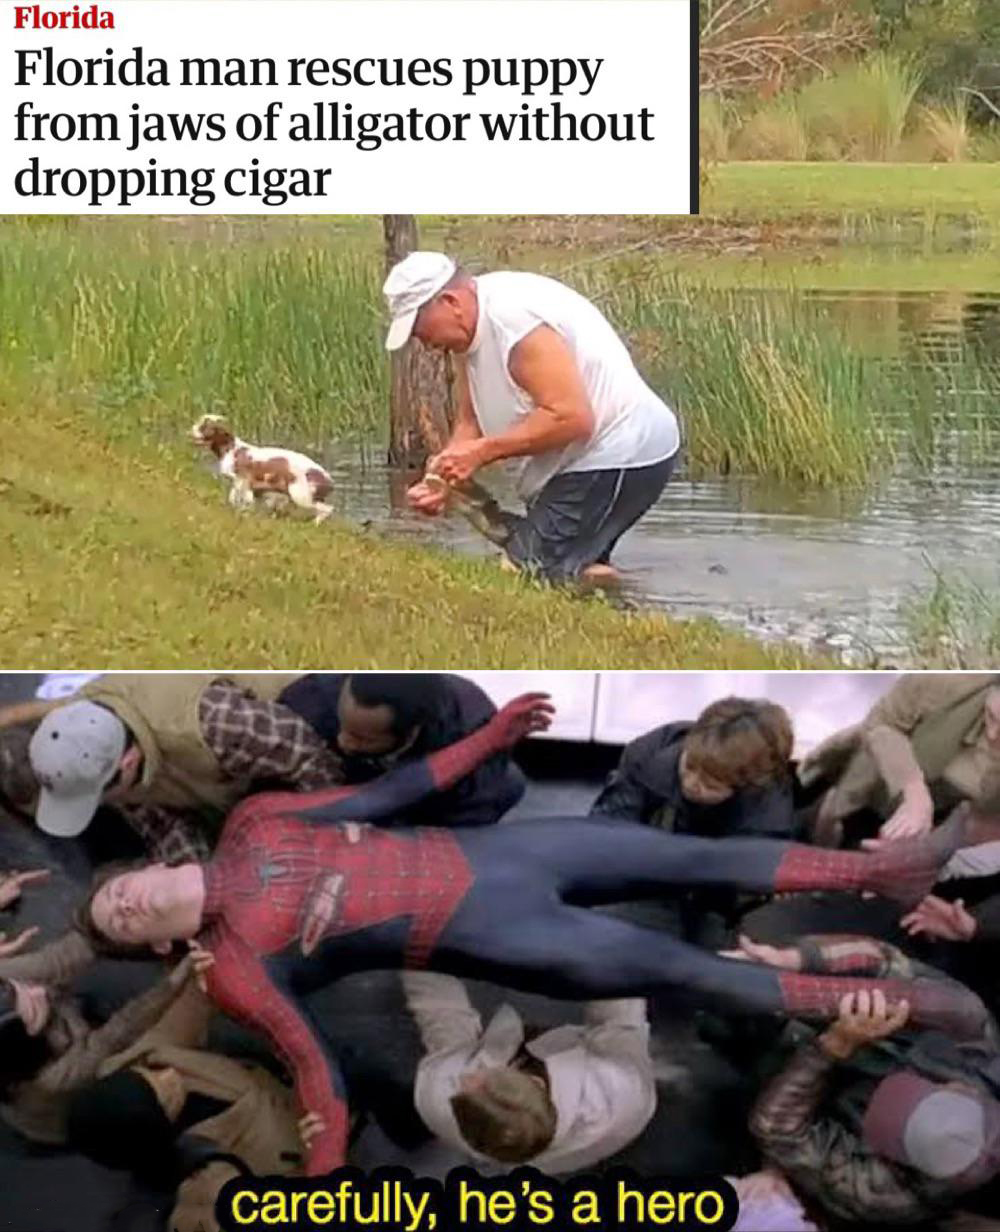 ratatouille 2 meme - Florida Florida man rescues puppy from jaws of alligator without dropping cigar carefully, he's a hero